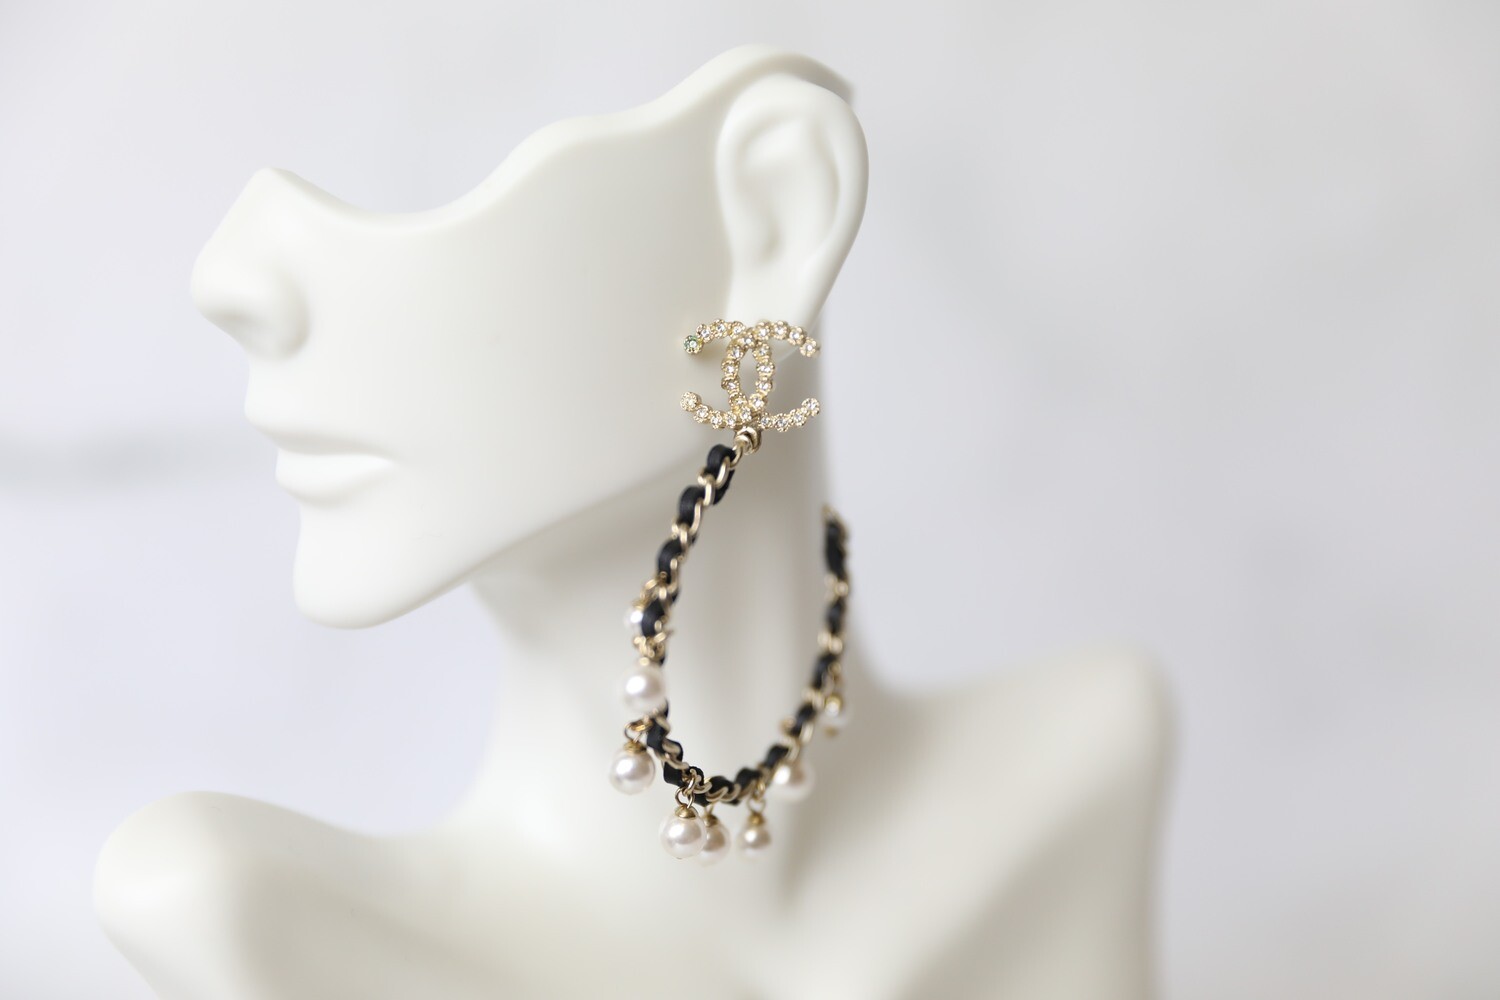 Chanel Earrings Drop Hoop with Black Leather and Pearls, New in Box WA001